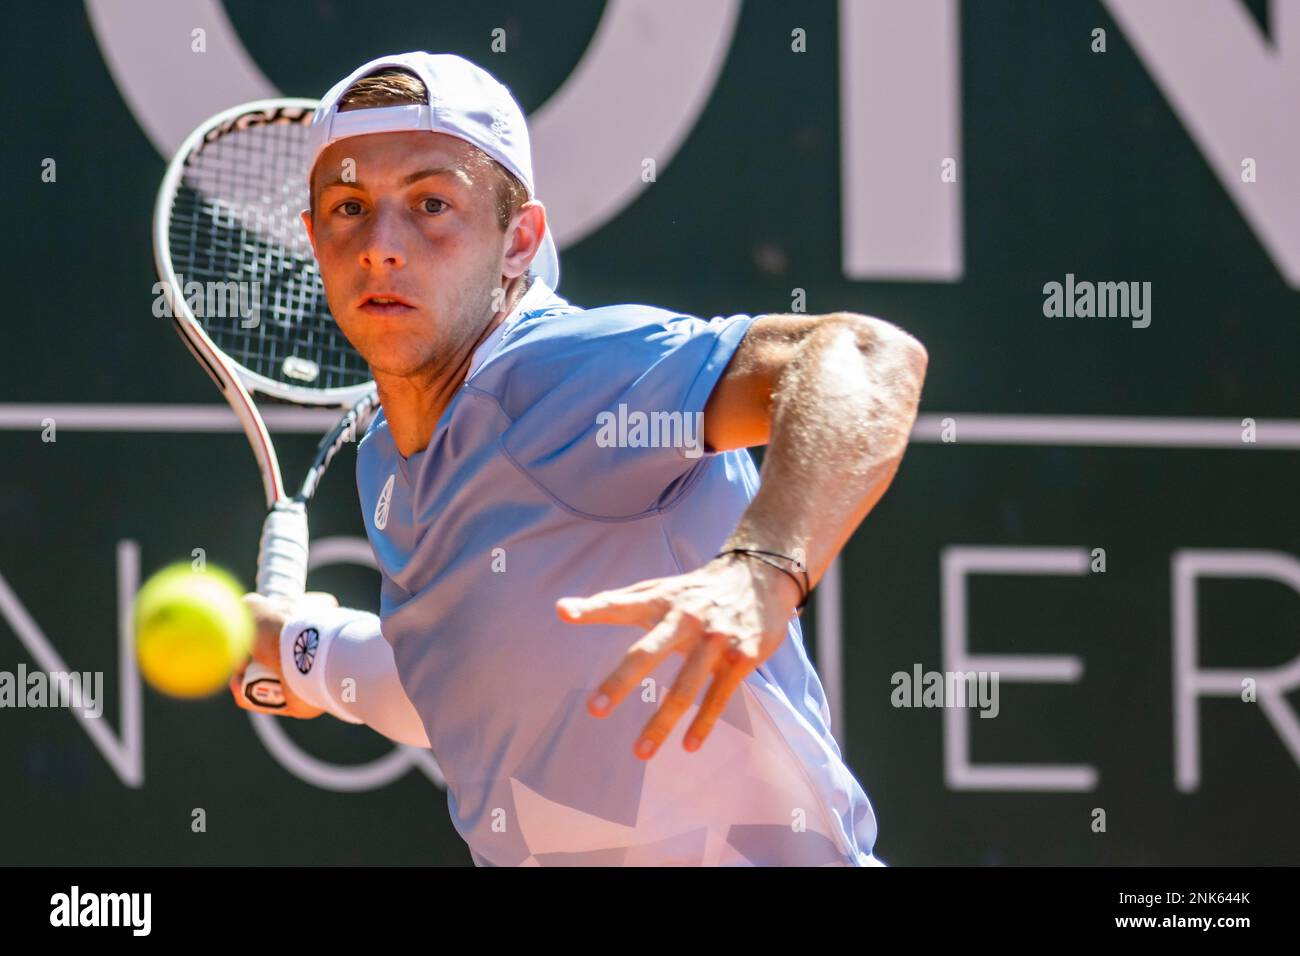 Tallon Griekspoor of Netherlands, returns a ball to Johan Nikles, of Switzerland, during their second round match, at the ATP 250 Geneva Open tournament in Geneva, Switzerland, Wednesday, May 18, 2022